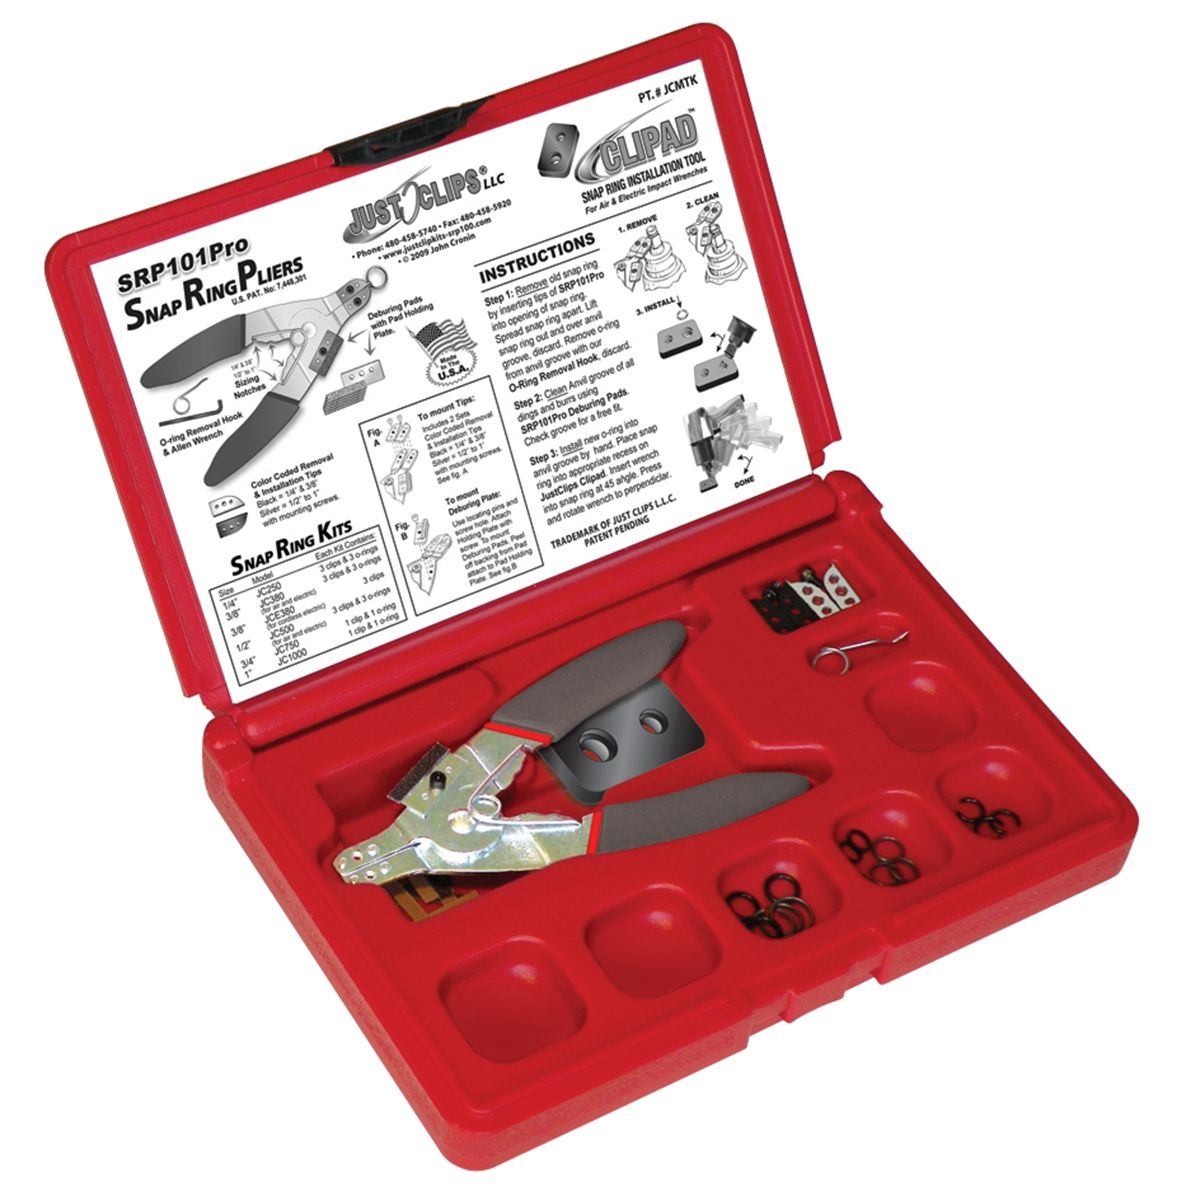 Deluxe Snap Ring Tool Kit for 1/4", 3/8" and 1/2"